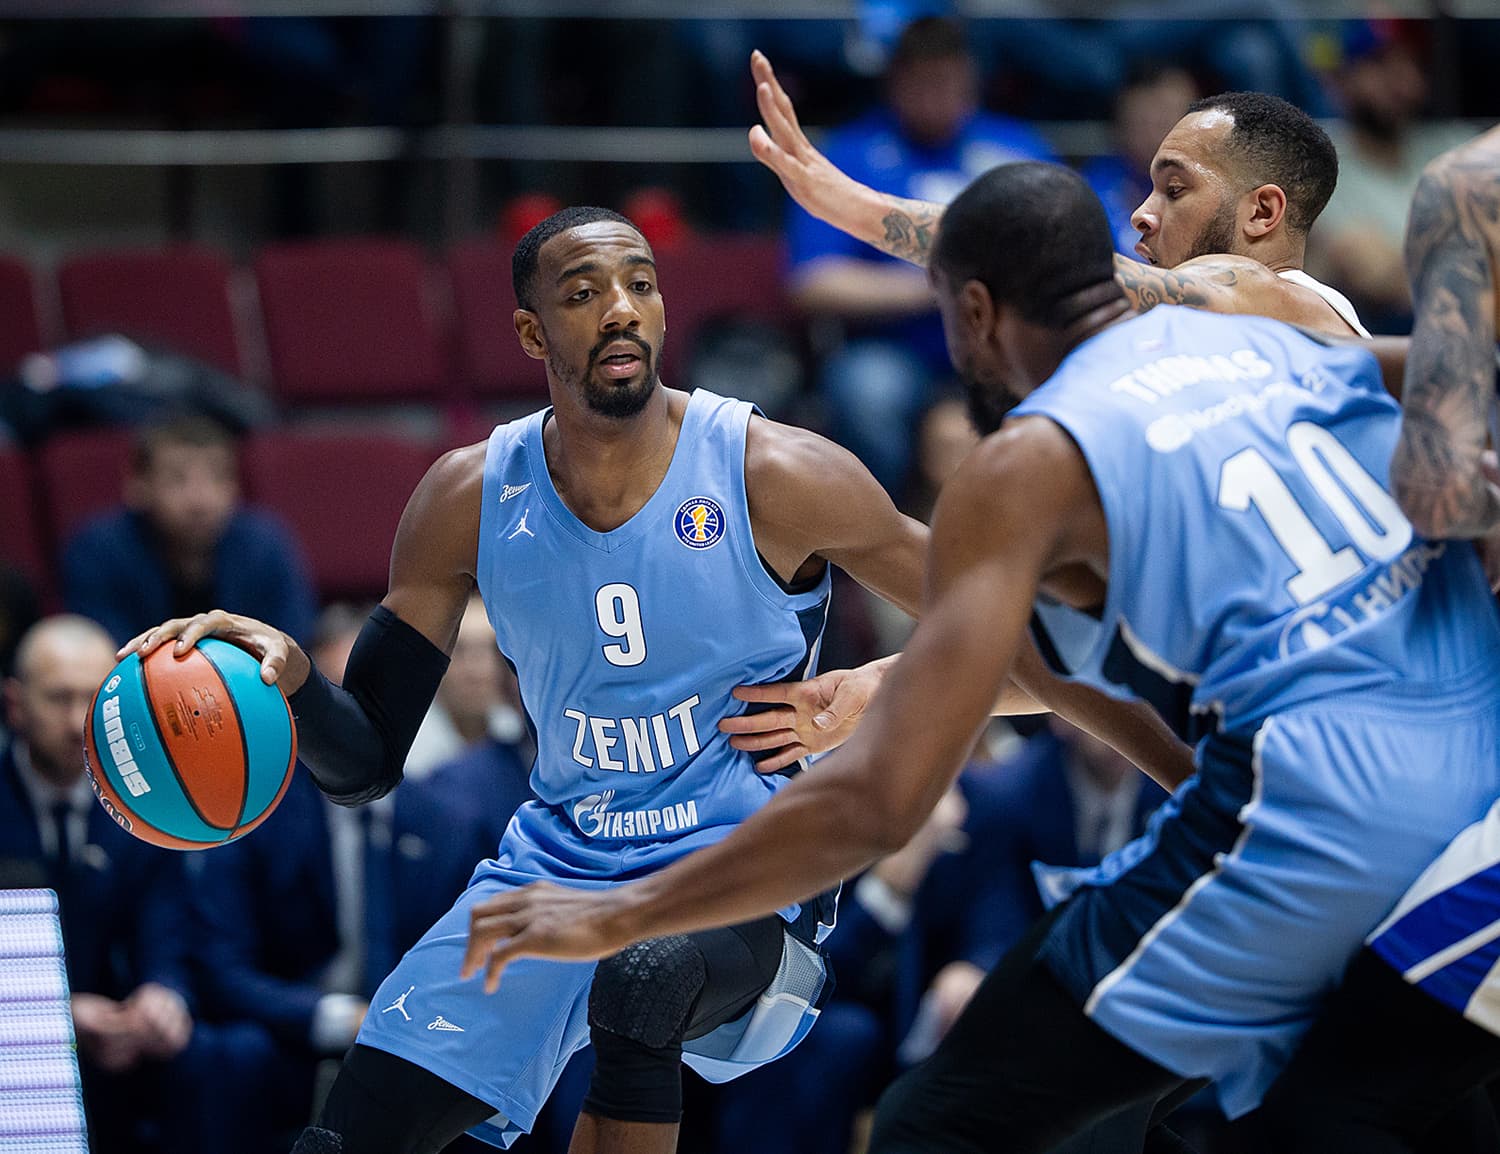 Zenit outplay Enisey to stop 4-games losing streak